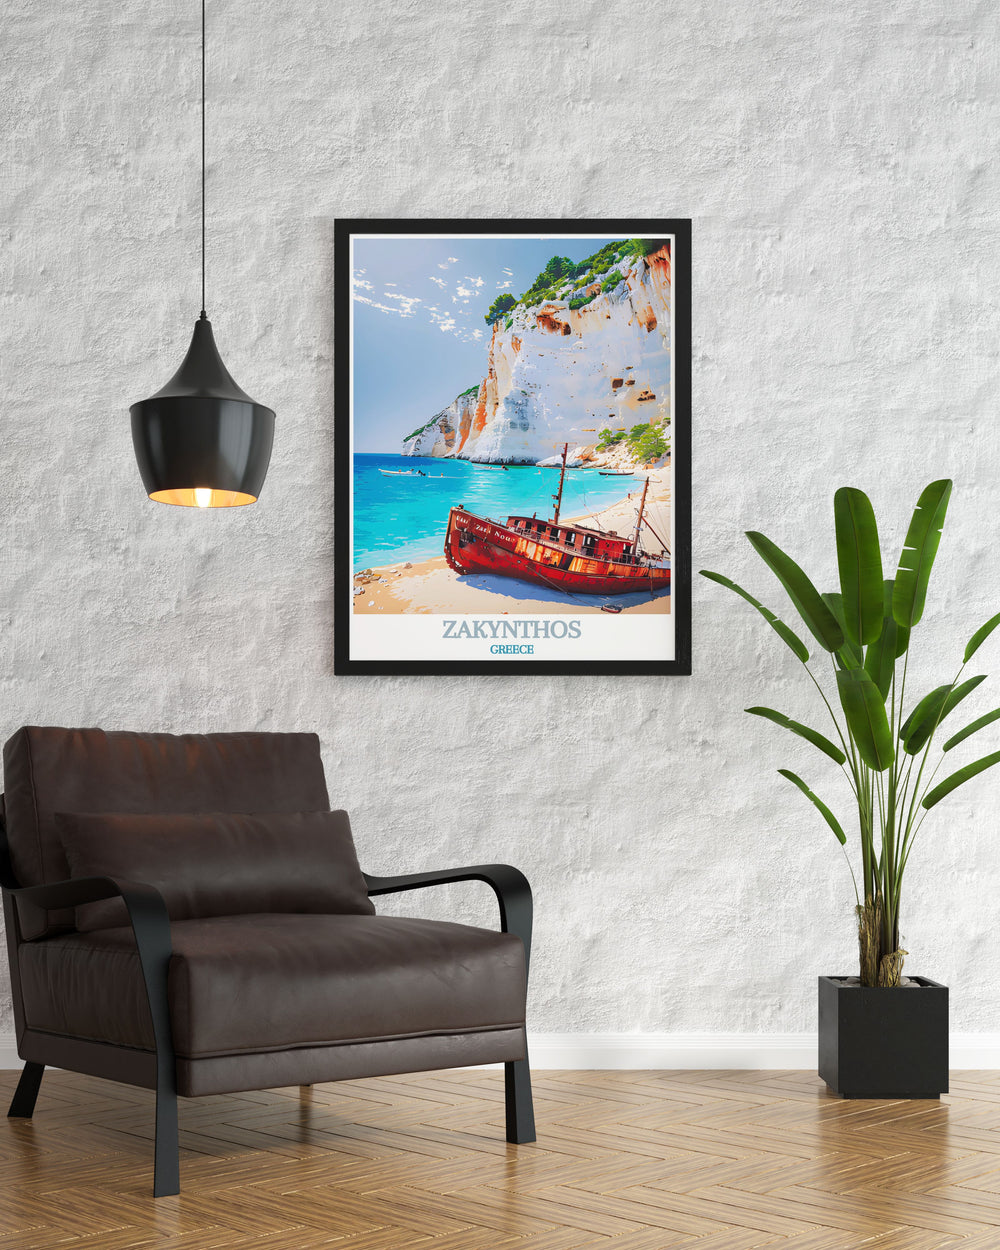 Stunning Spice Farms poster showcasing the vibrant colors and rich aromas of Zanzibars spice fields perfect for adding a touch of nature and culture to your home decor with high quality prints that everyone will admire.